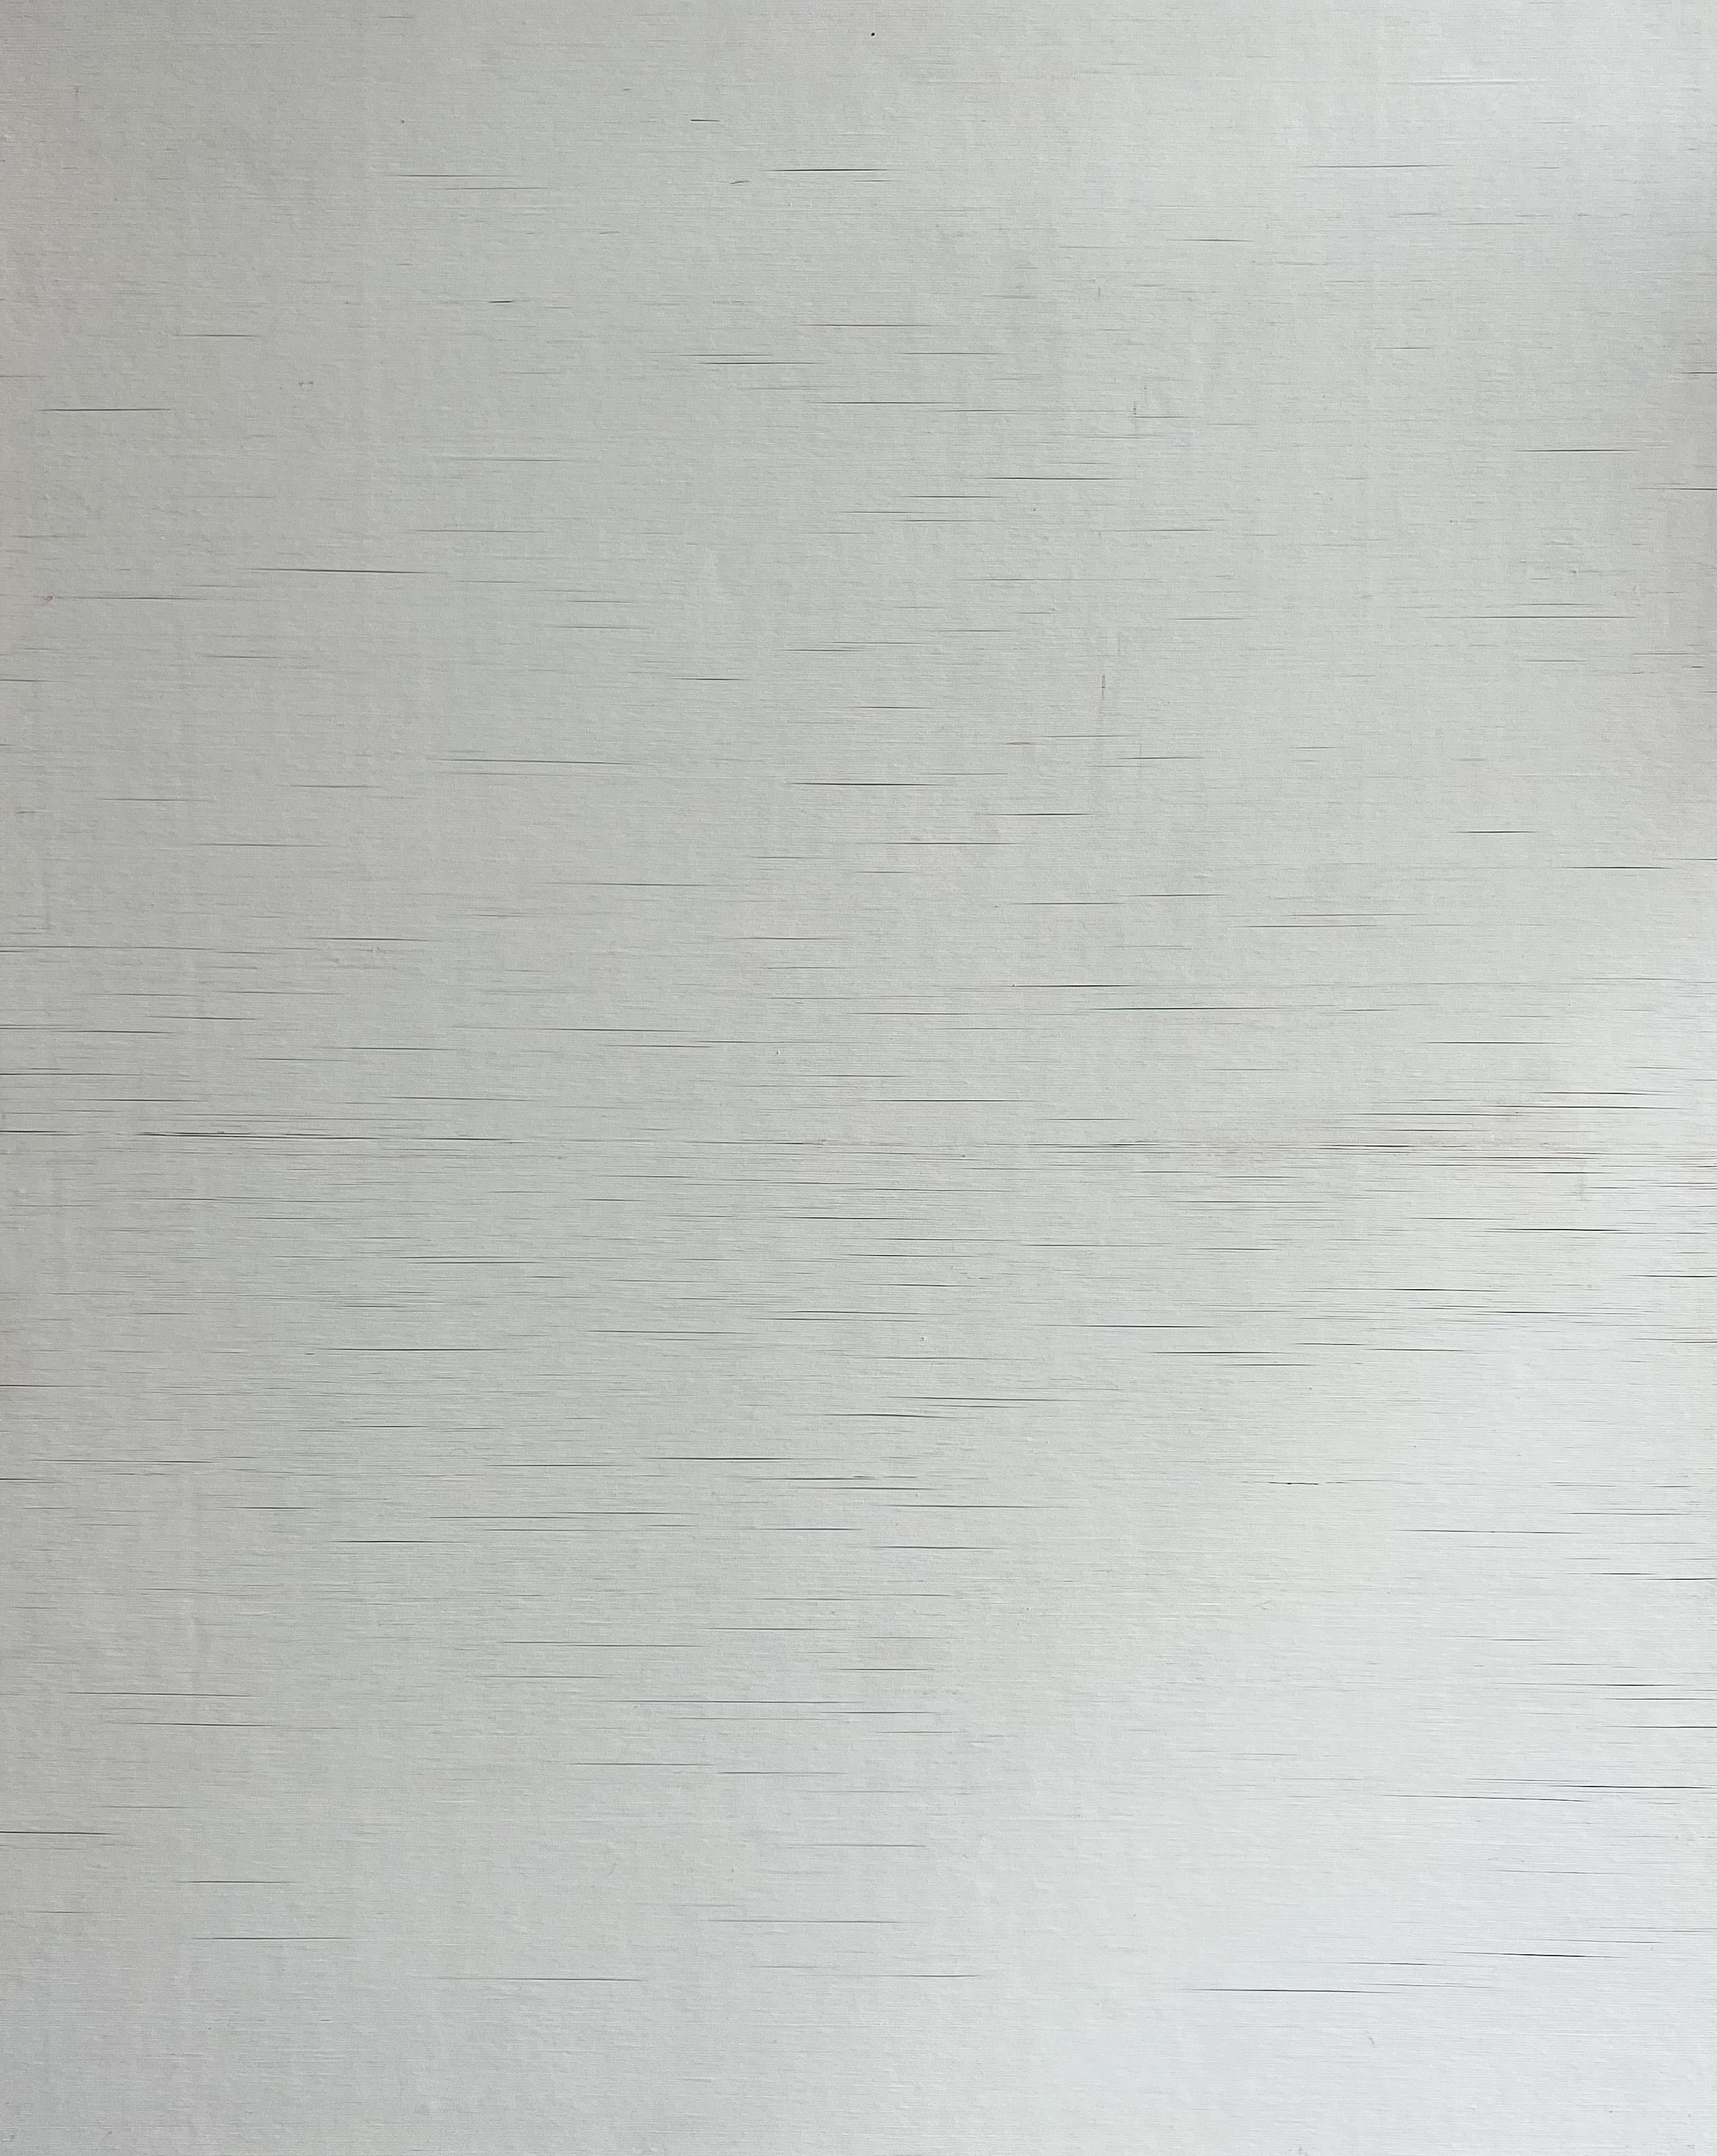 Peter Kramer Abstract Painting - Large painting made of hundreds of tiny strips of paper, minimalism, white 